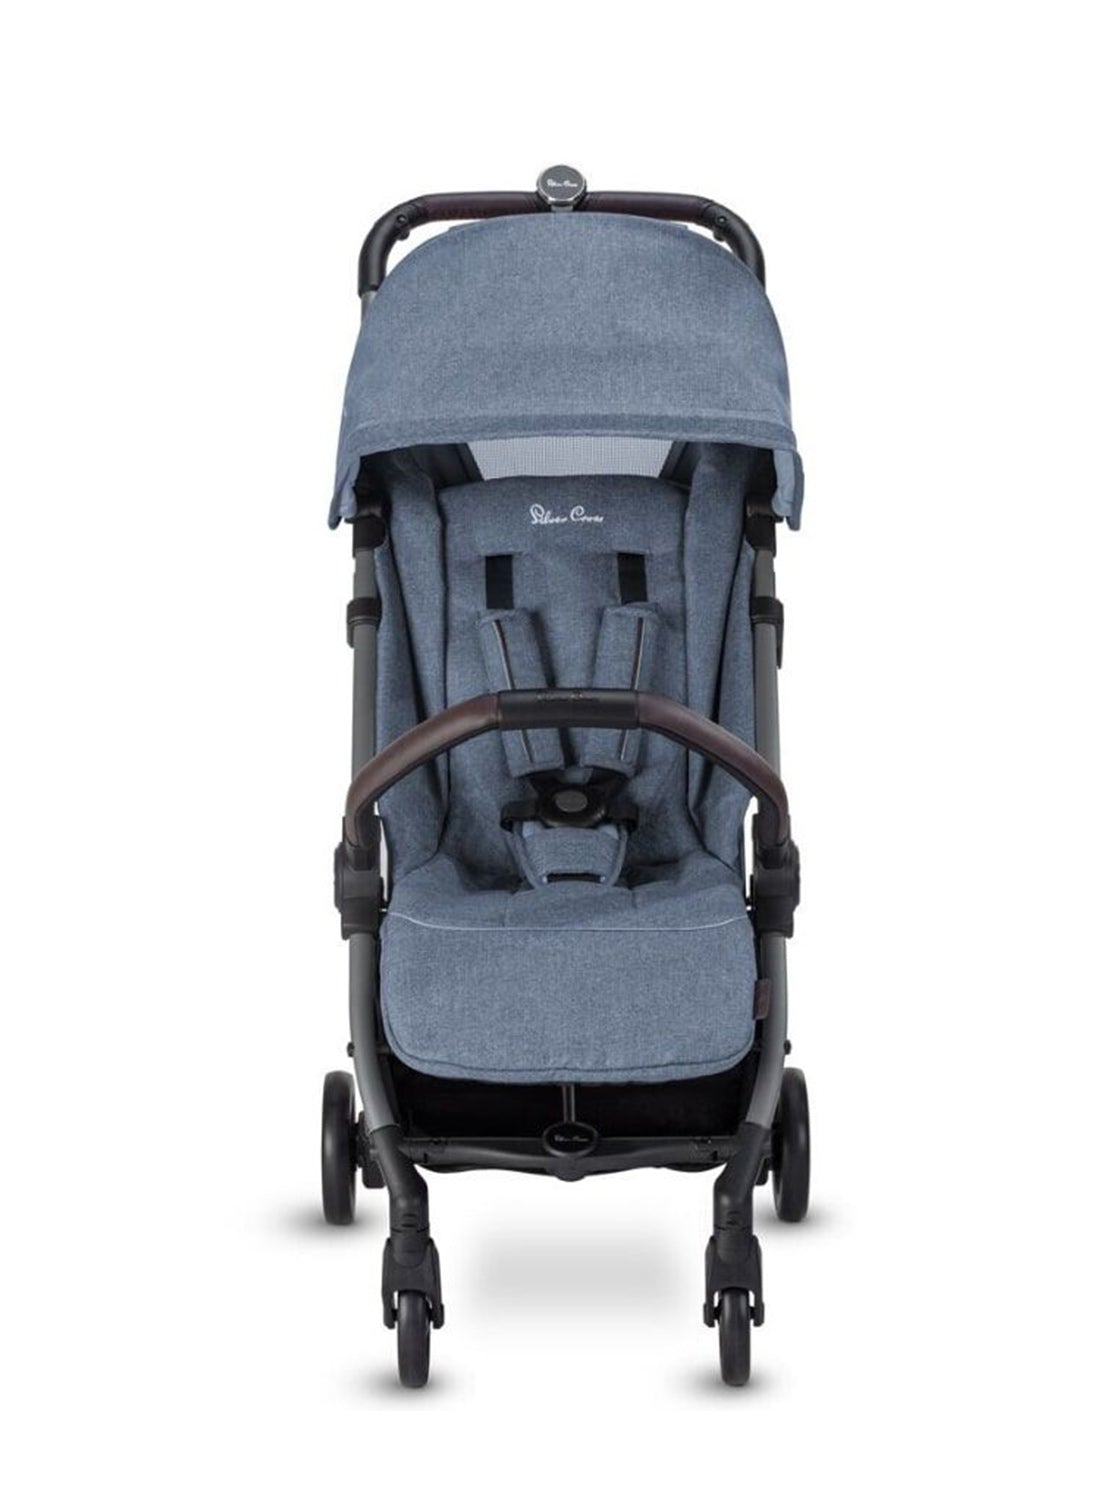 SILVER CROSS Jet Super Compact Stroller Special Edition, Ocean, -- ANB Baby